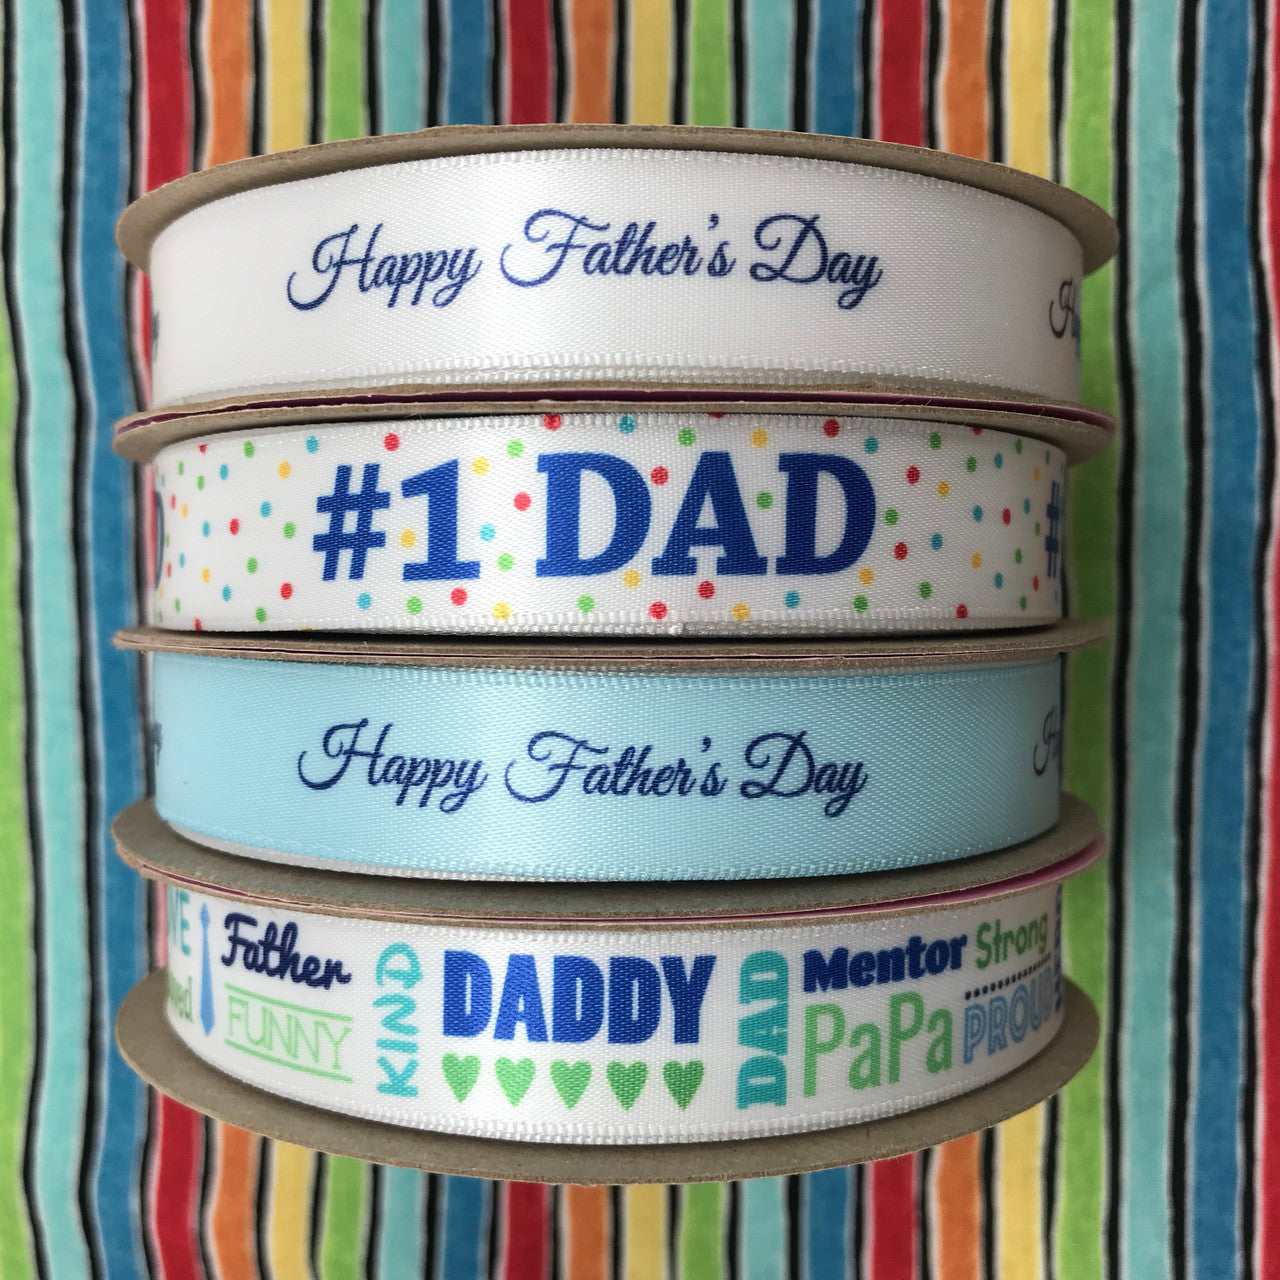 Mix and Match our Father's Day ribbons to make a fun Father's day gathering for Dad